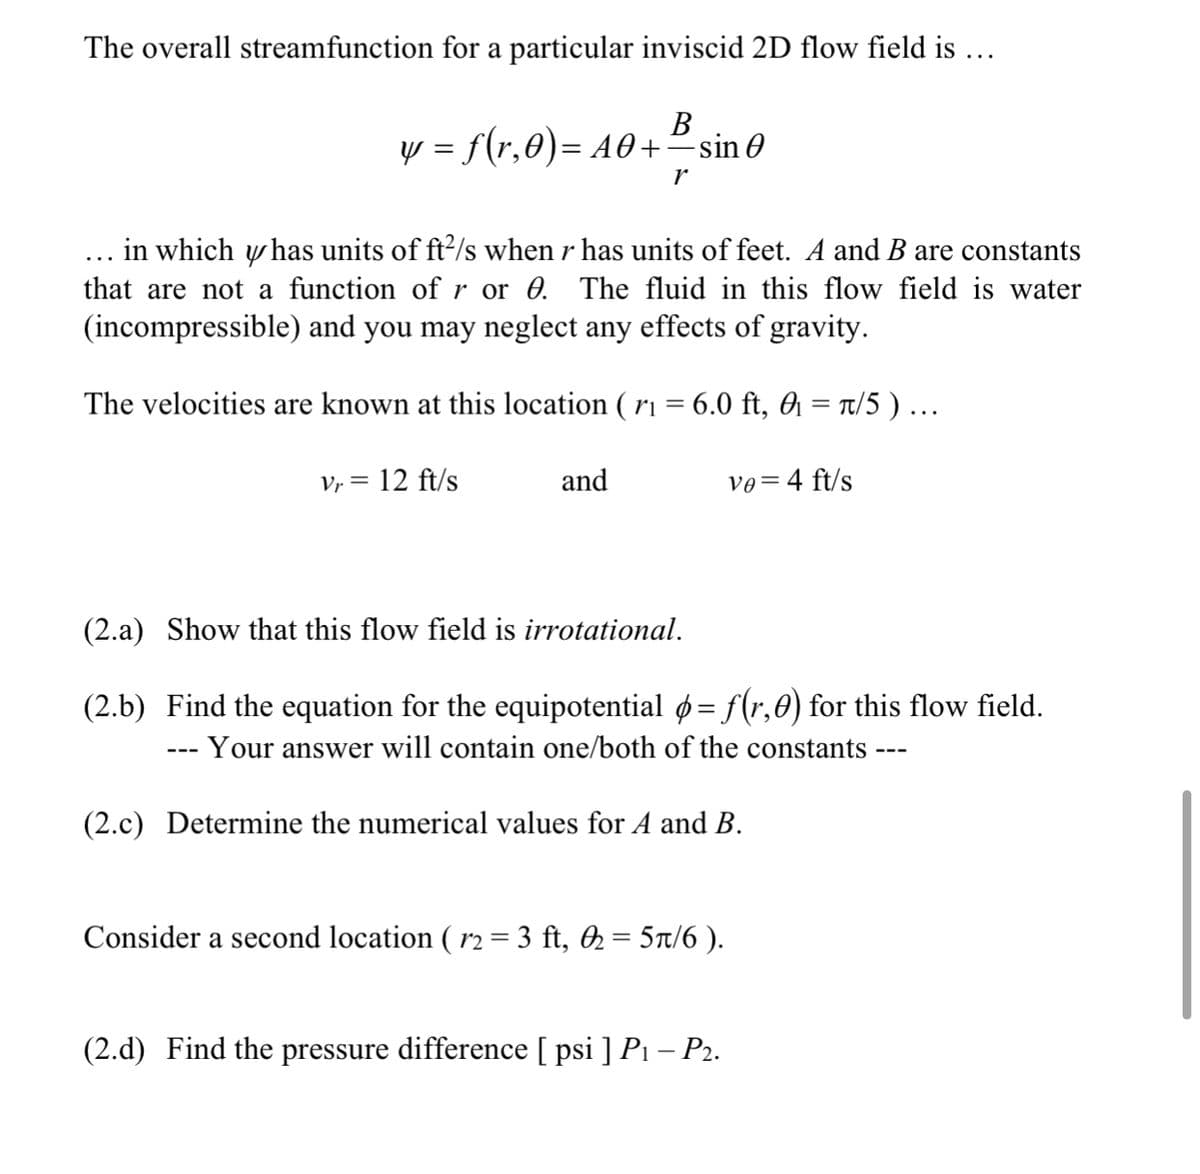 The overall streamfunction for a particular inviscid 2D flow field is ...
В
y = f(r,0)= A0+²sin 0
in which y has units of ft2/s when r has units of feet. A and B are constants
that are not a function of r or 0. The fluid in this flow field is water
(incompressible) and you may neglect any effects of gravity.
The velocities are known at this location ( r1 = 6.0 ft, 0 = t/5 )...
Vr = 12 ft/s
and
ve=4 ft/s
(2.a) Show that this flow field is irrotational.
(2.b) Find the equation for the equipotential ø= f(r,0) for this flow field.
Your answer will contain one/both of the constants --
---
(2.c) Determine the numerical values for A and B.
Consider a second location ( r2 = 3 ft, 2 = 5Tt/6 ).
(2.d) Find the pressure difference [ psi ] P1 – P2.
